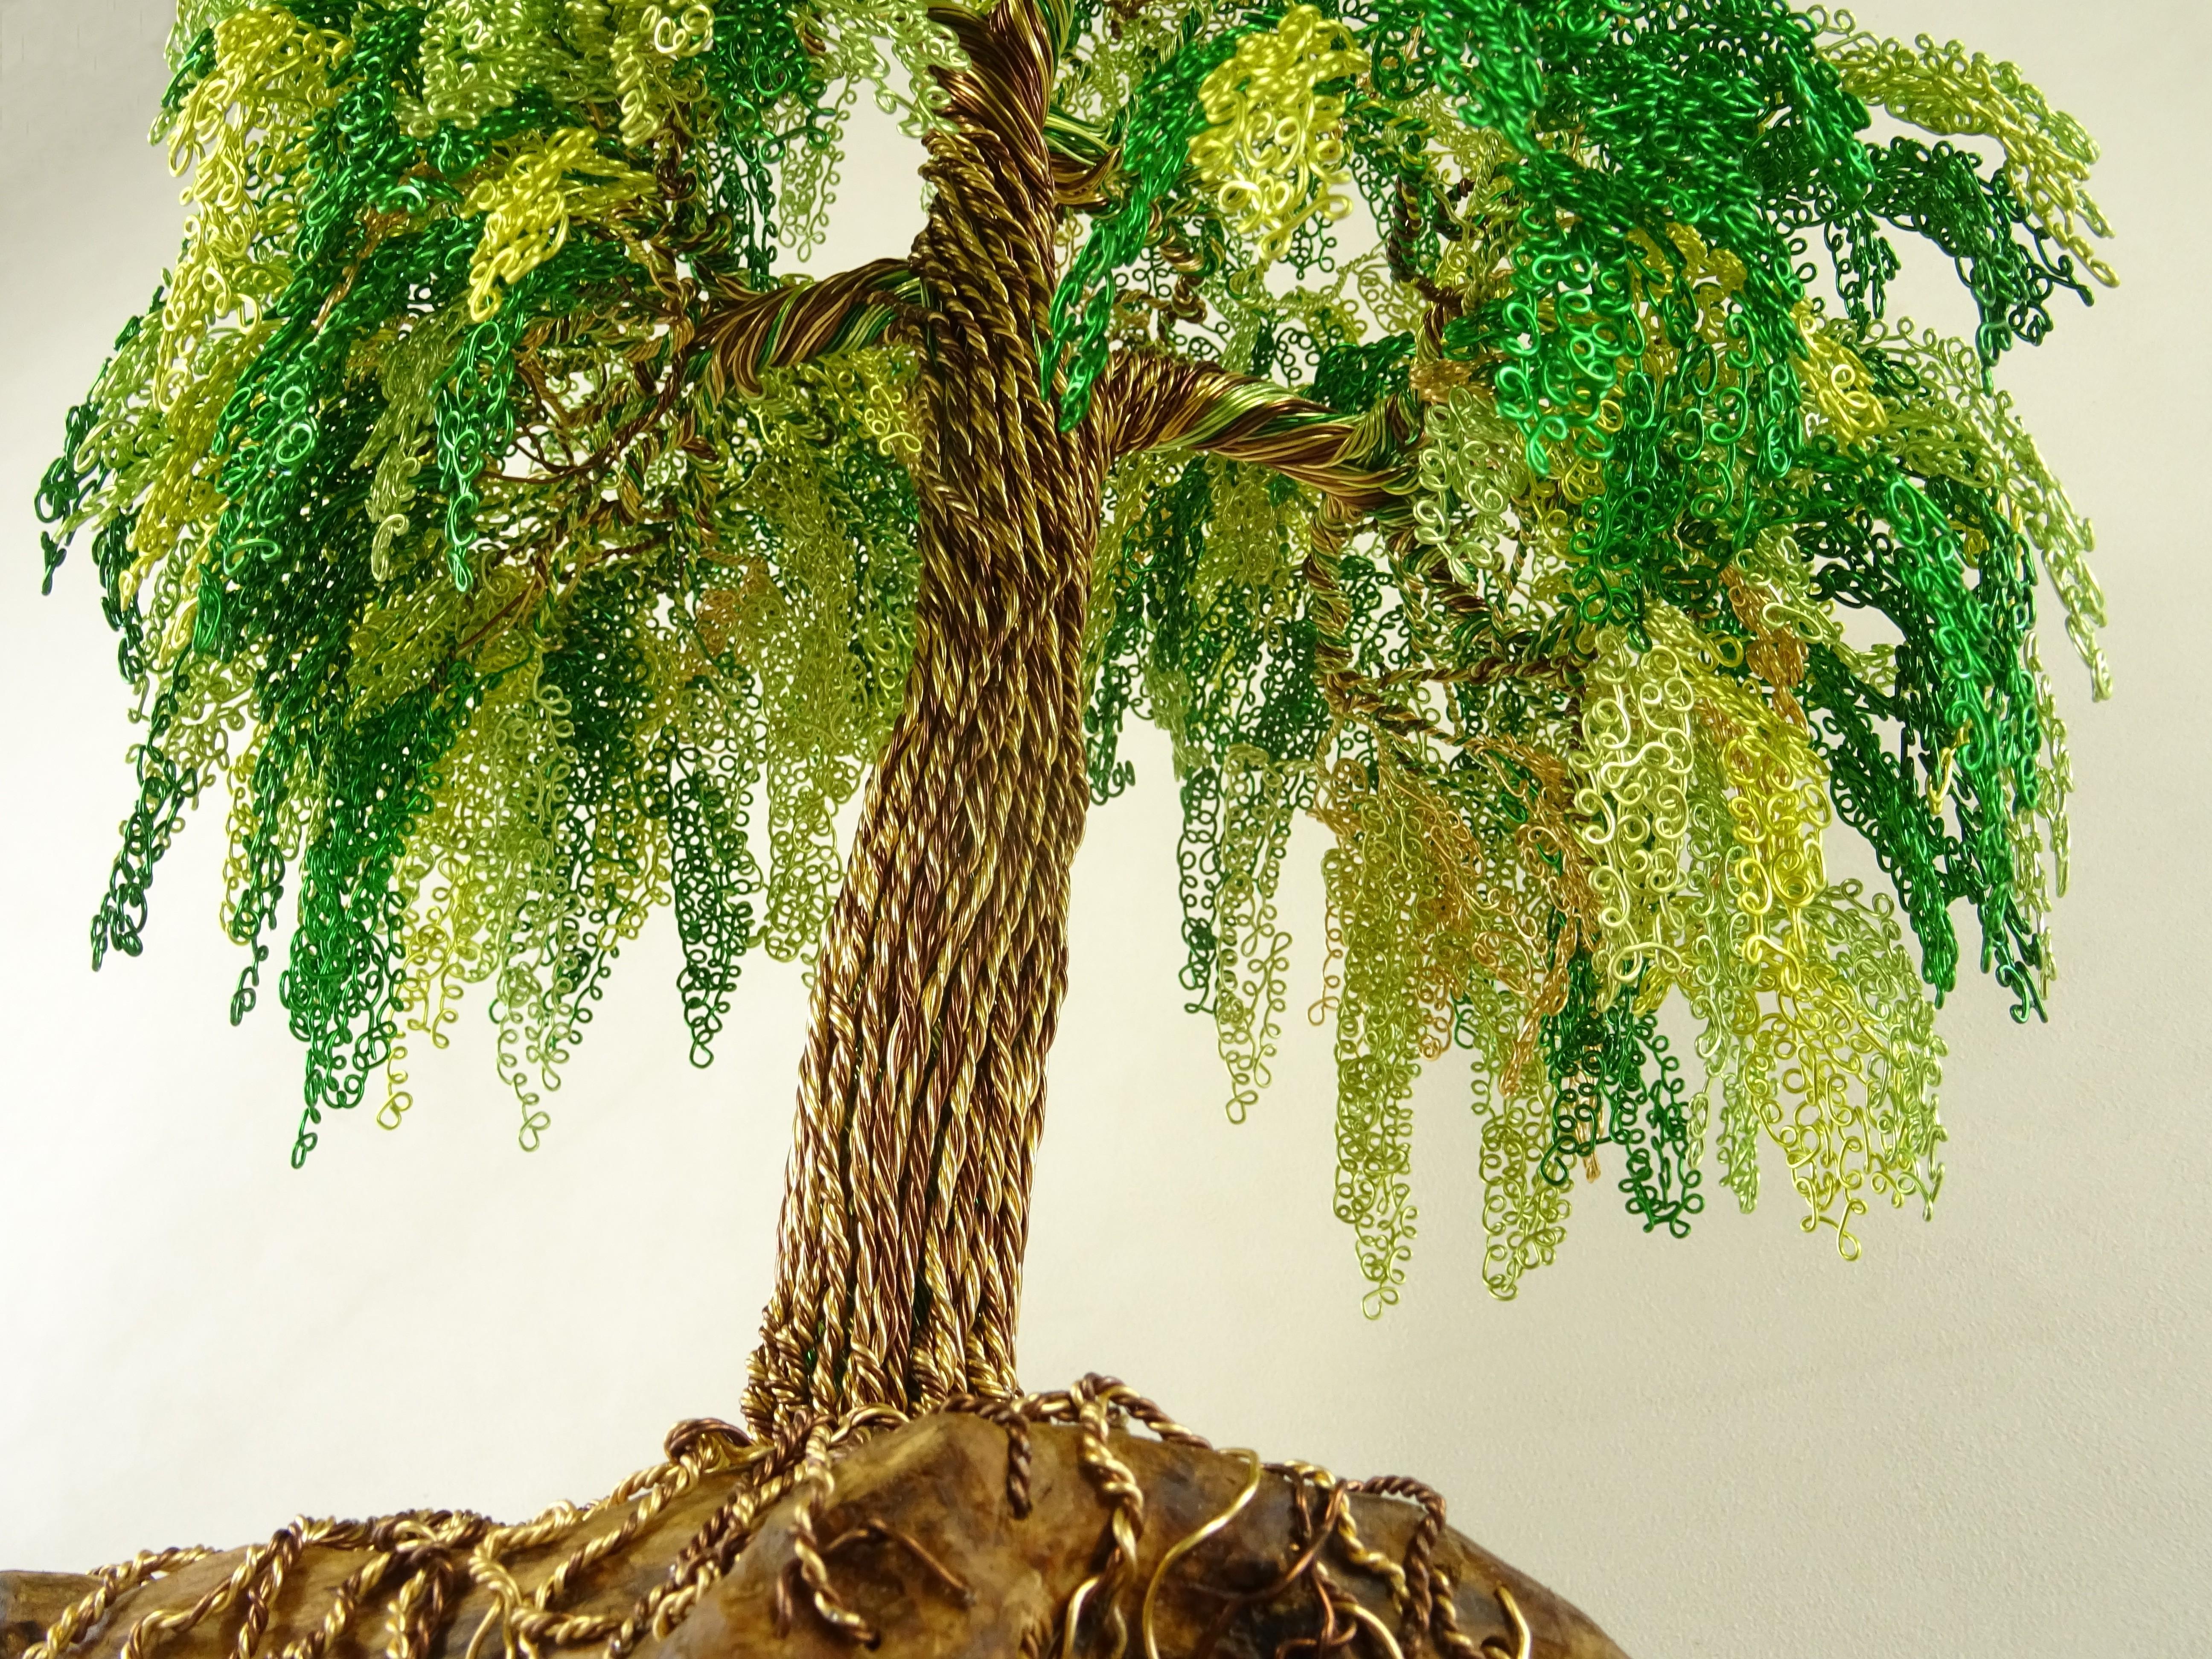 The Cascata Bonsai is inspired by the Niagara falls.
The materials are wood and metals, representing both the strength of life and the roots of Mother Nature.
Sculptures are composed by wires that intertwine each other. 
The Bonsai is composed by